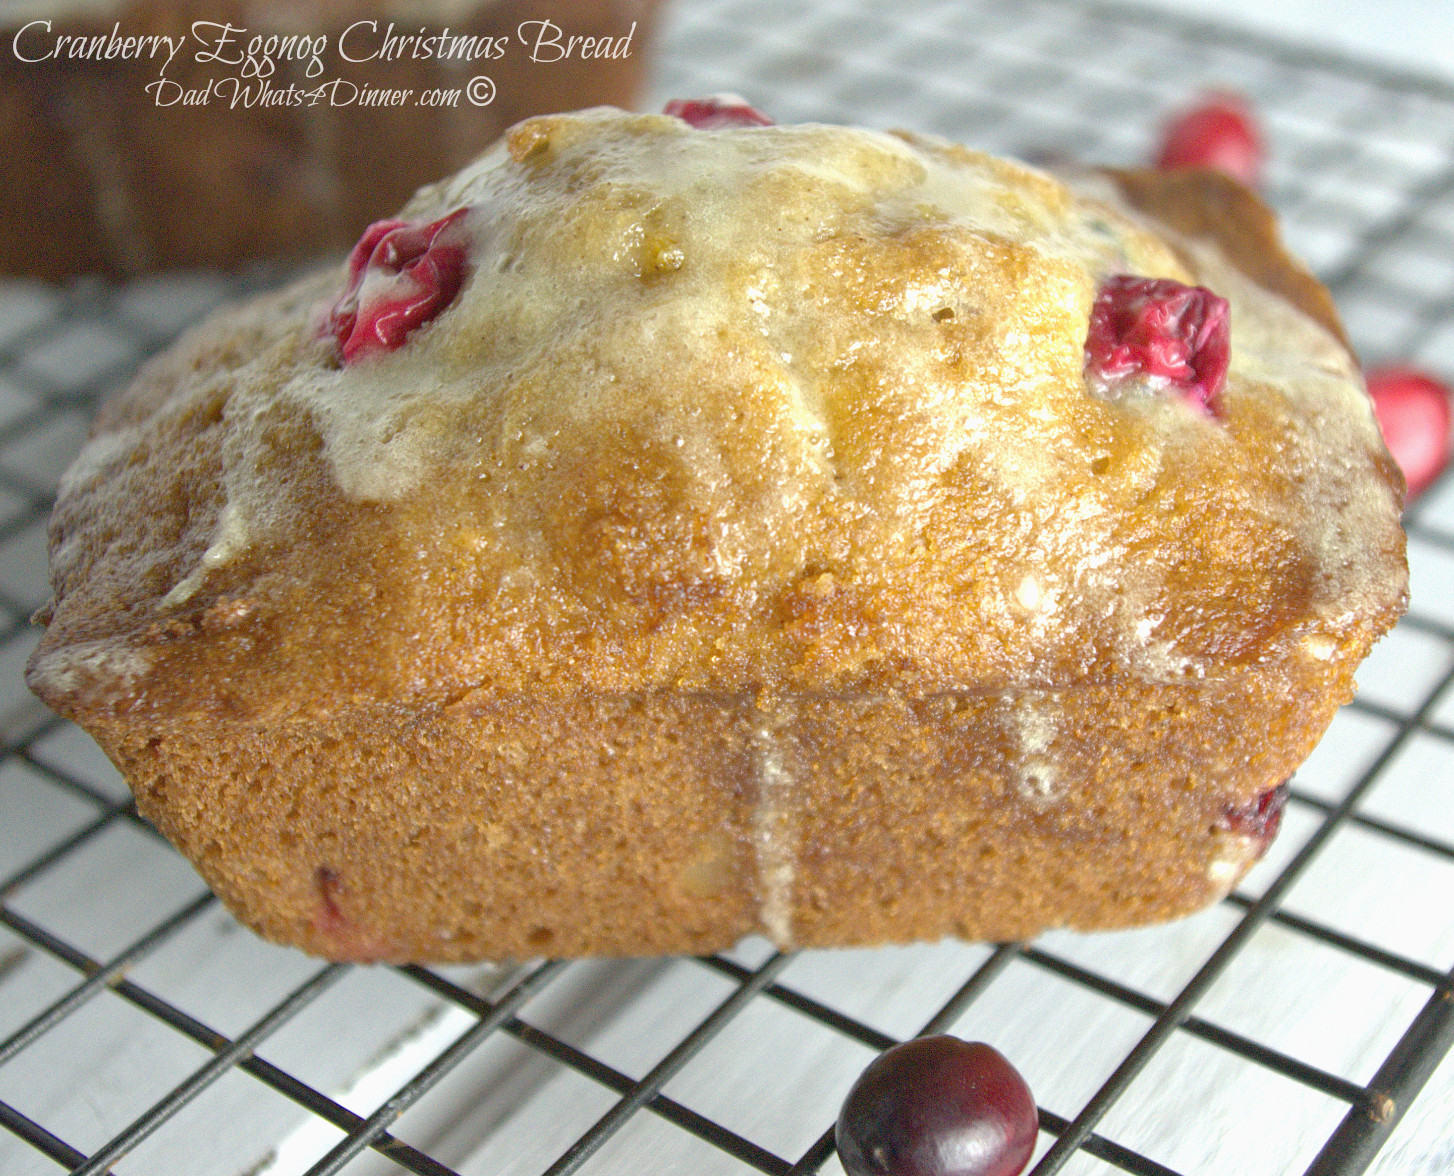 Cranberry Christmas Bread
 Cranberry Eggnog Christmas Bread Dad Whats 4 Dinner